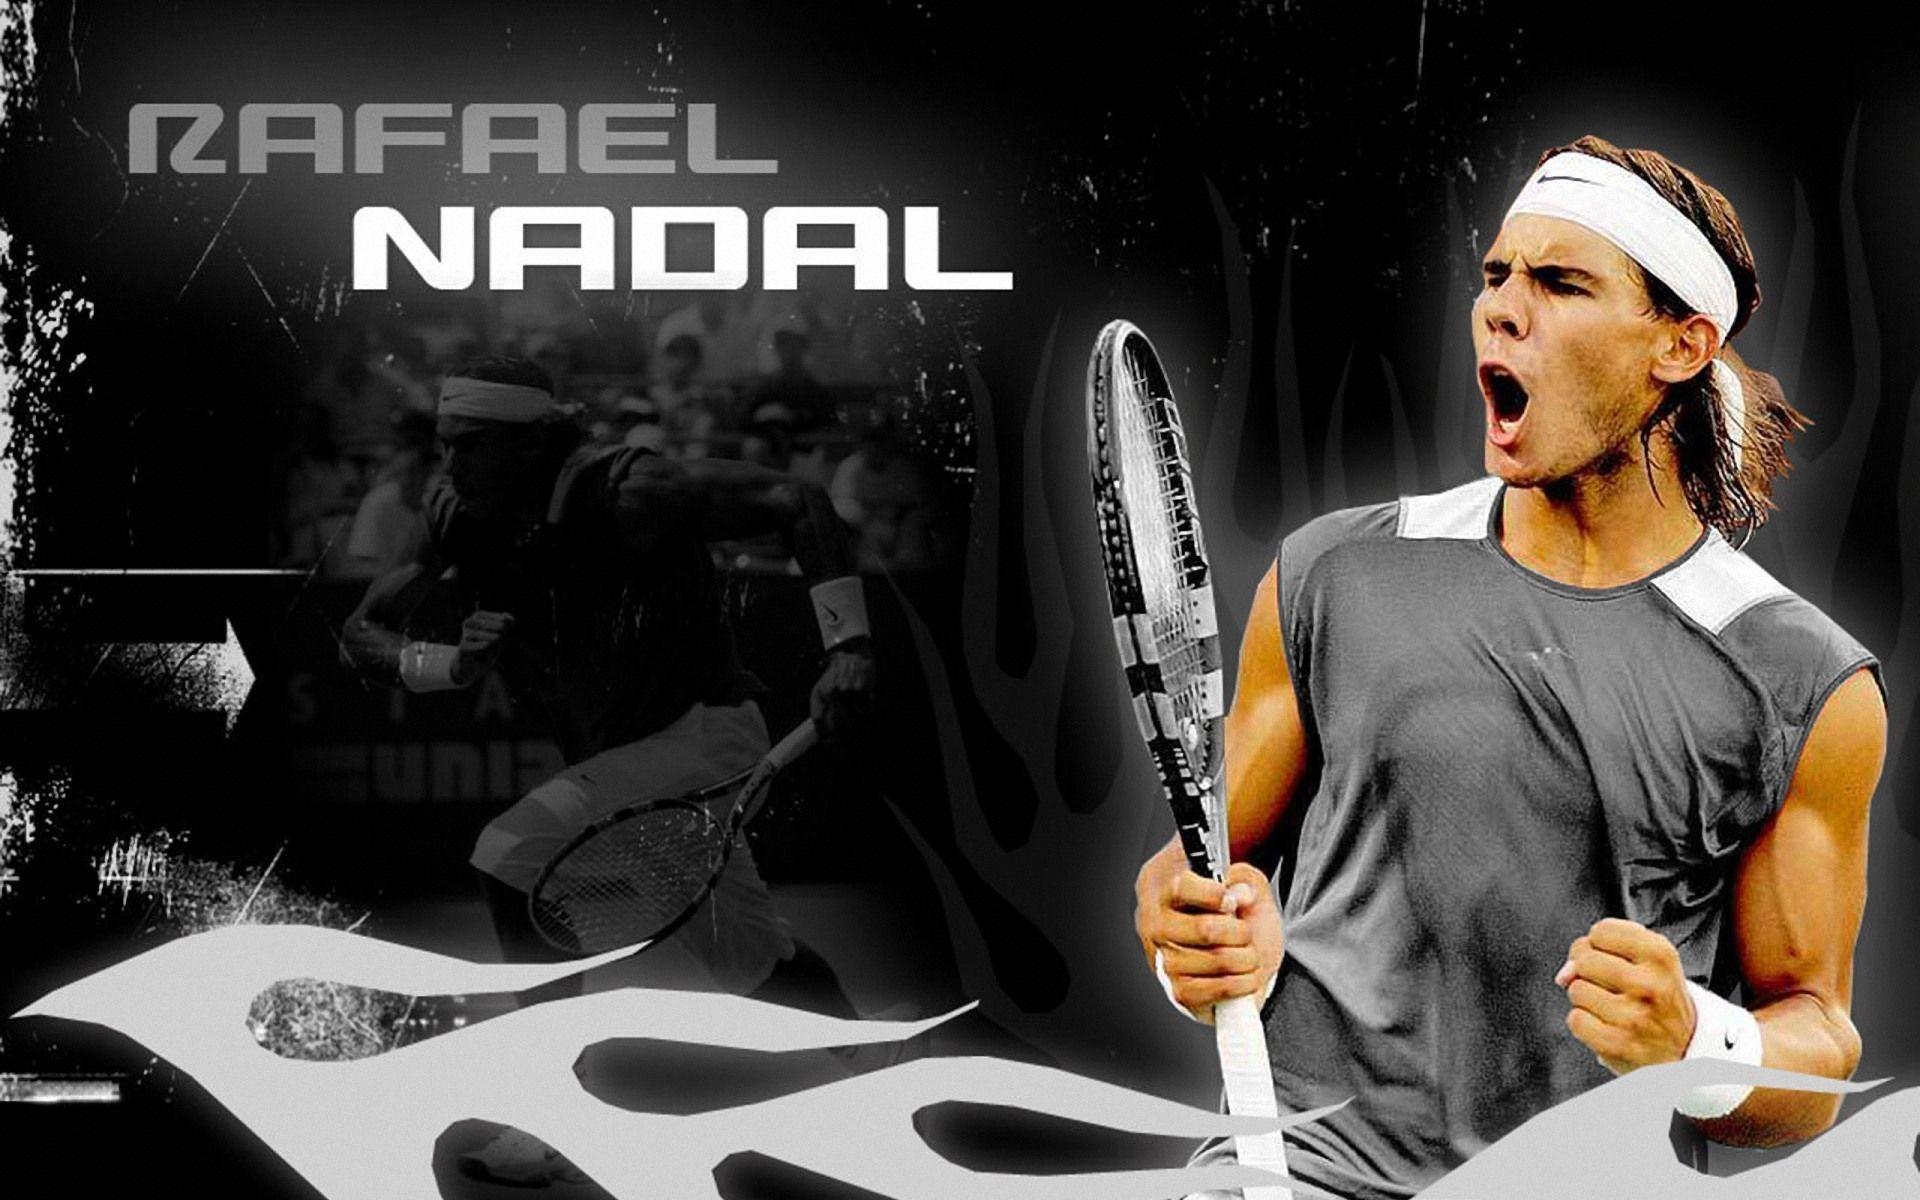 Rafael Nadal Wallpaper HD Collection For Free Download